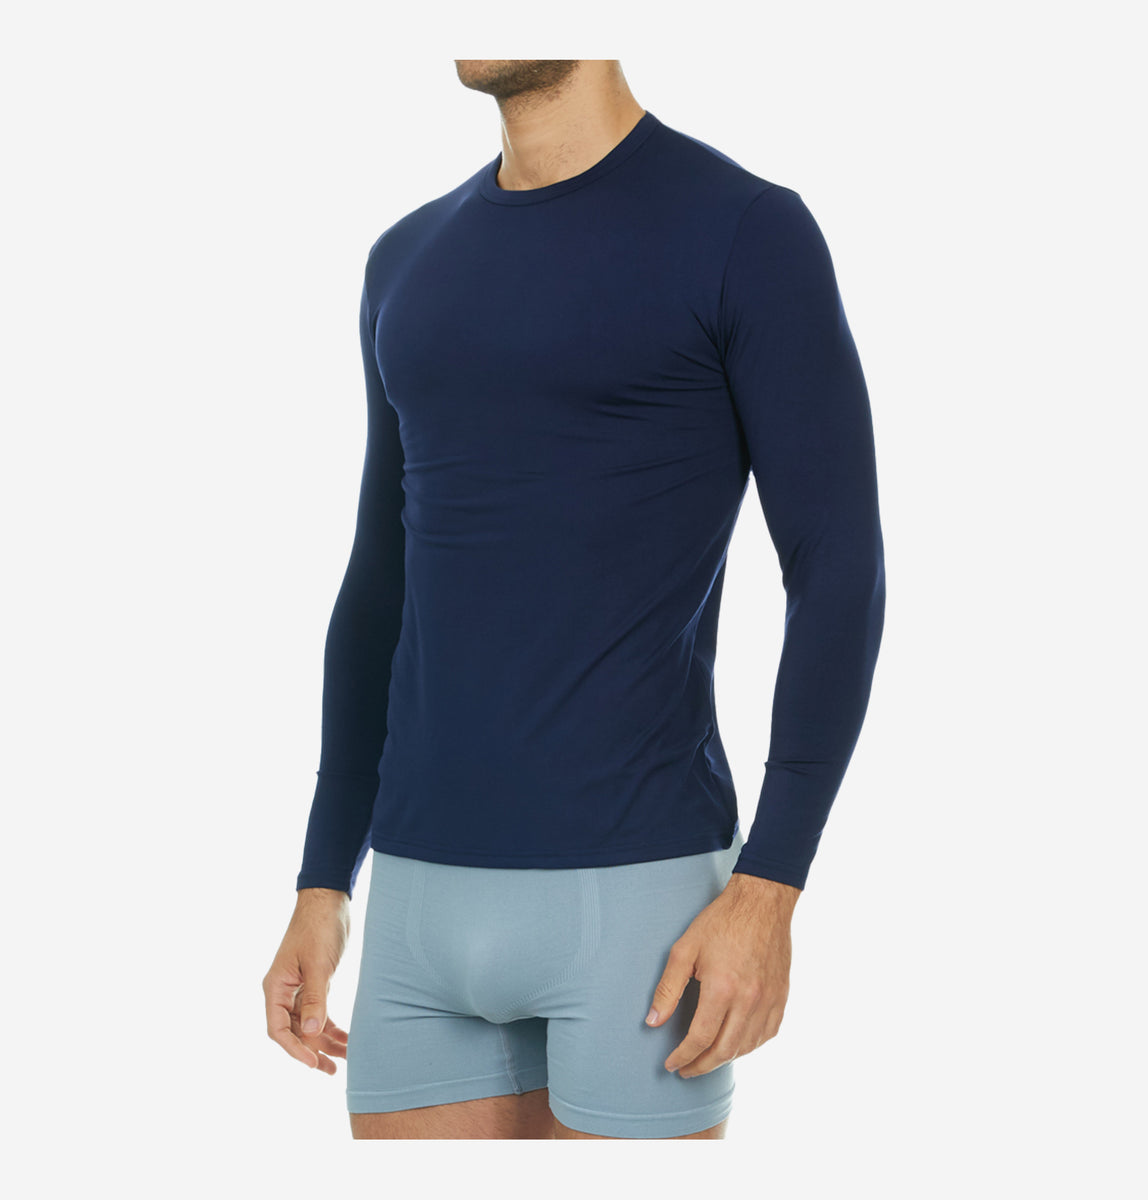 Fleece Lined Long Sleeve Underwear T Shirt Thermajohn Mens Ultra Soft Thermal Shirt Compression Baselayer Crew Neck Top 